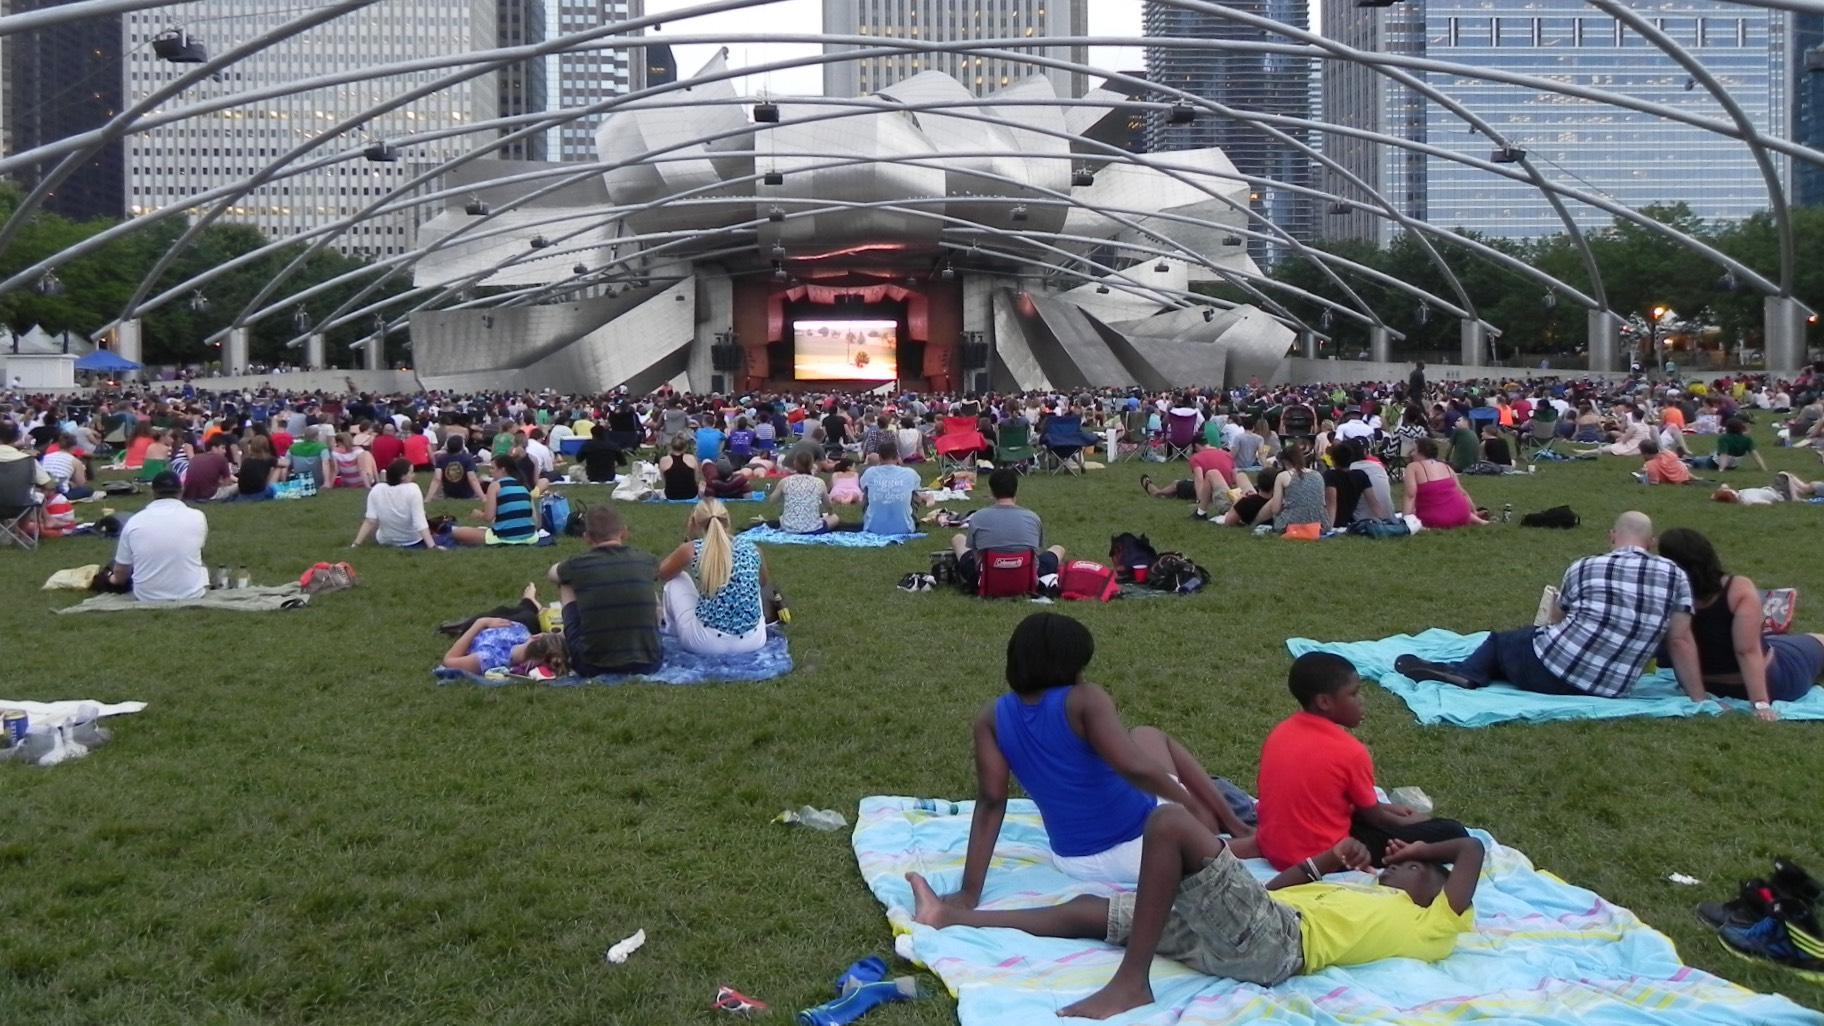 Outdoor movie screenings in Millennium Park, 2021. (Courtesy of the Chicago Department of Cultural Affairs and Special Events)